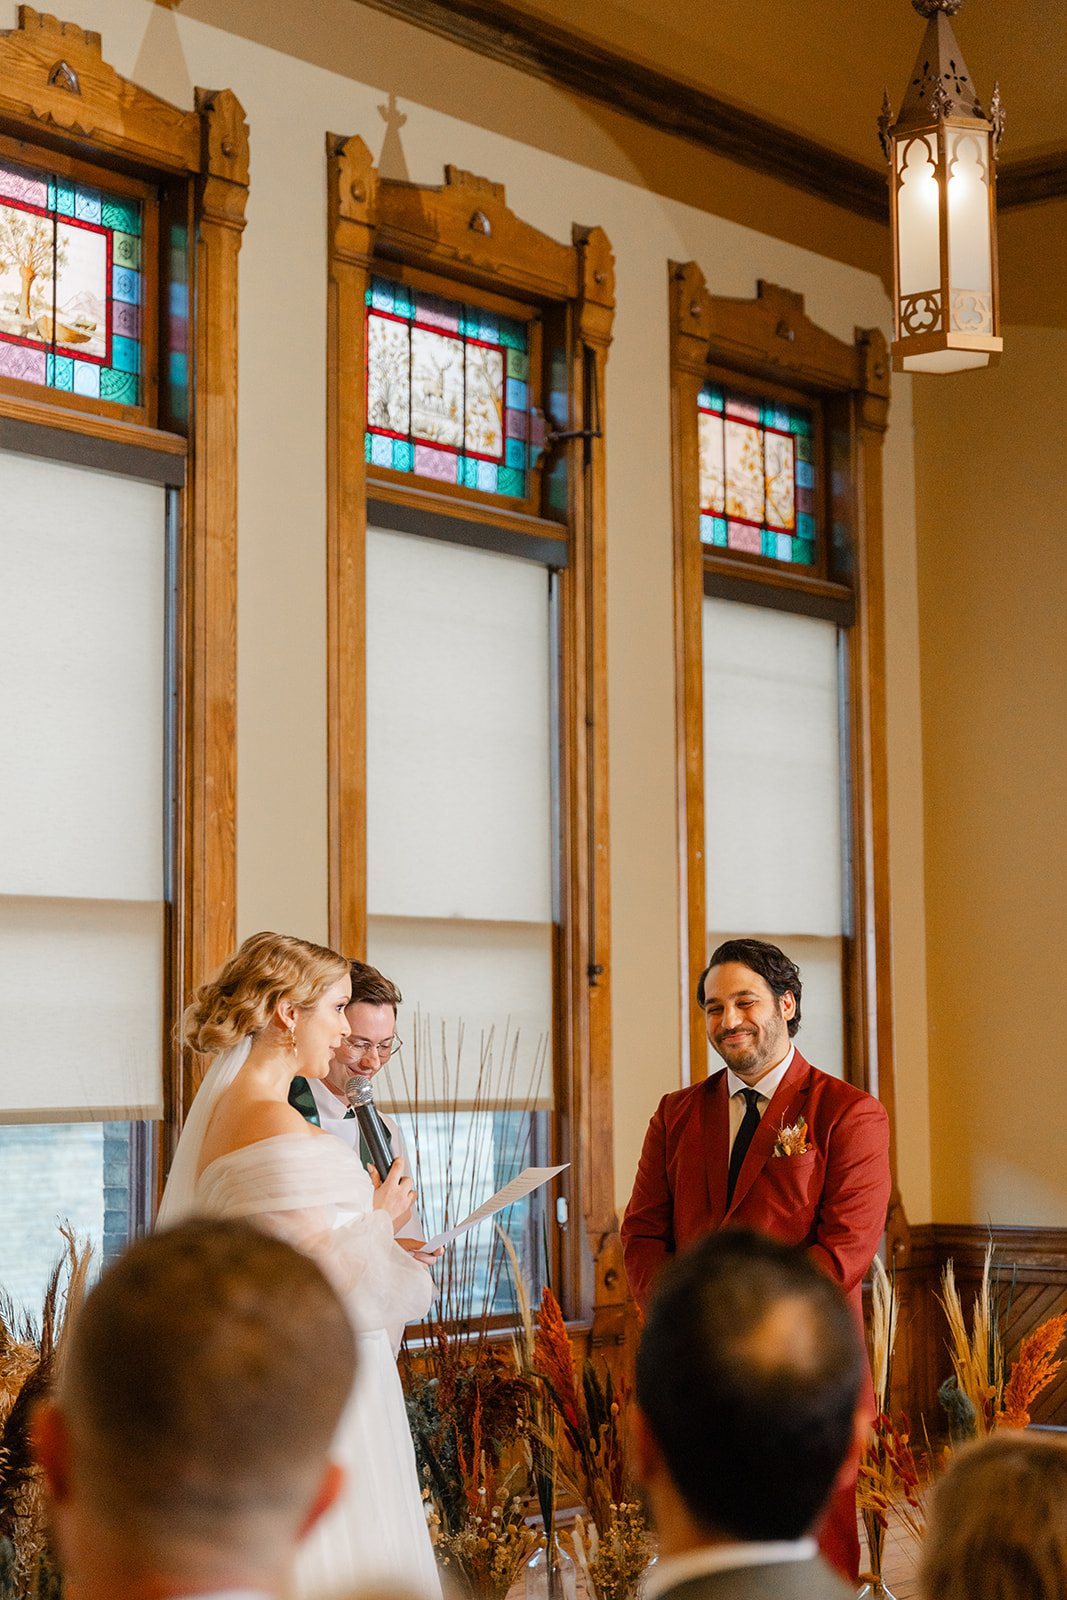 The Best Place at the Historic Pabst Brewery Wedding Photographer